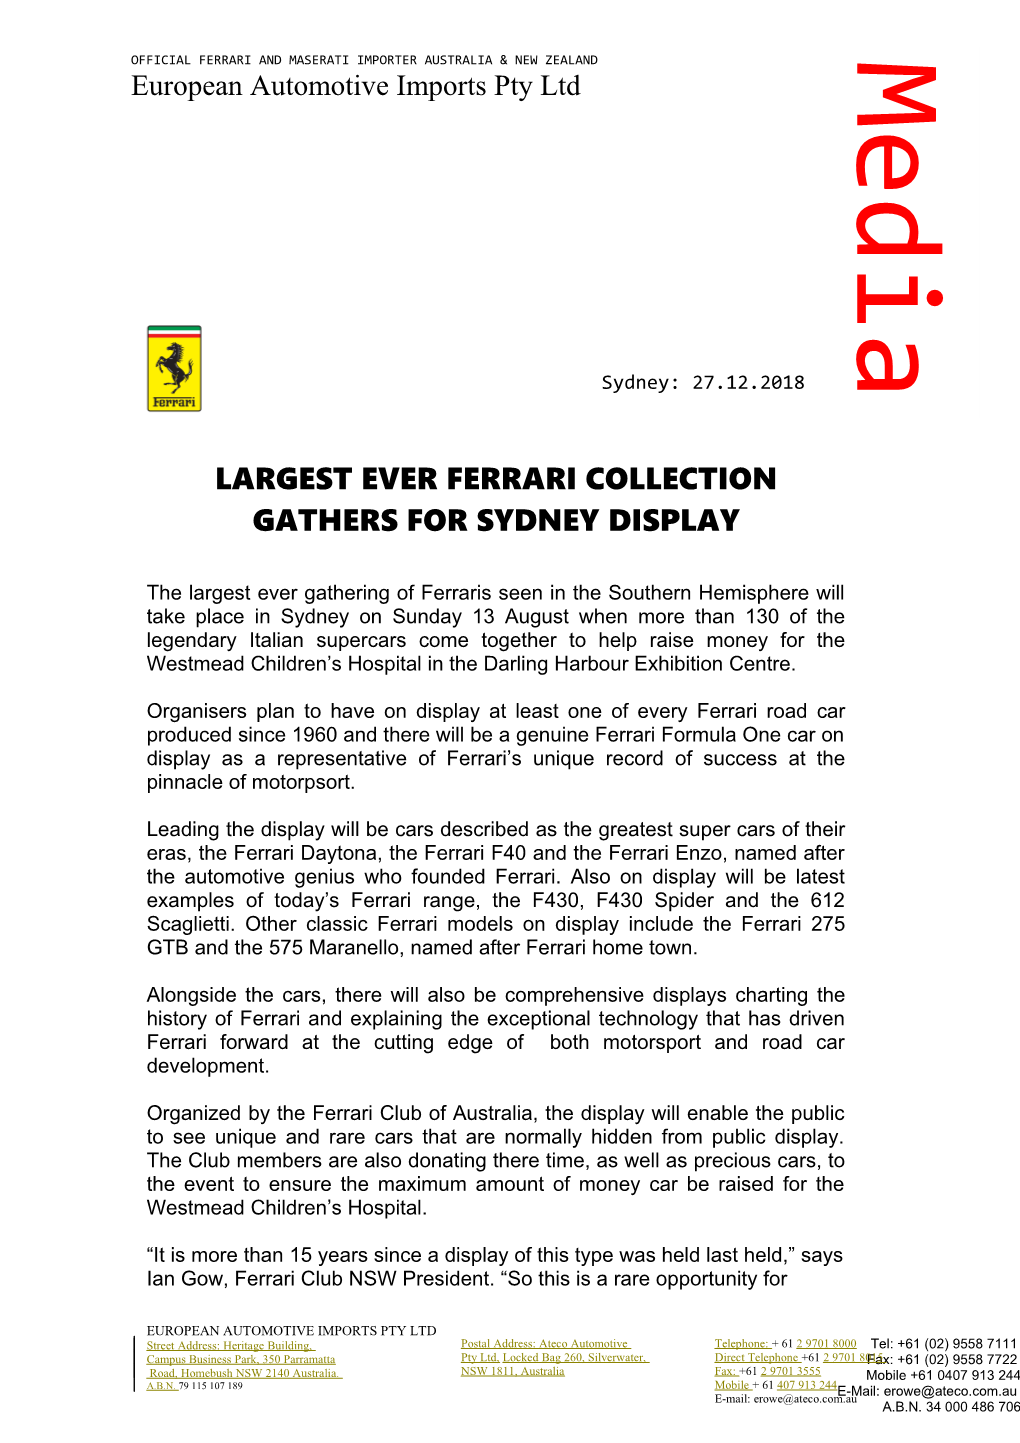 Largest Ever Ferrari Collection Gathers for Sydney Display